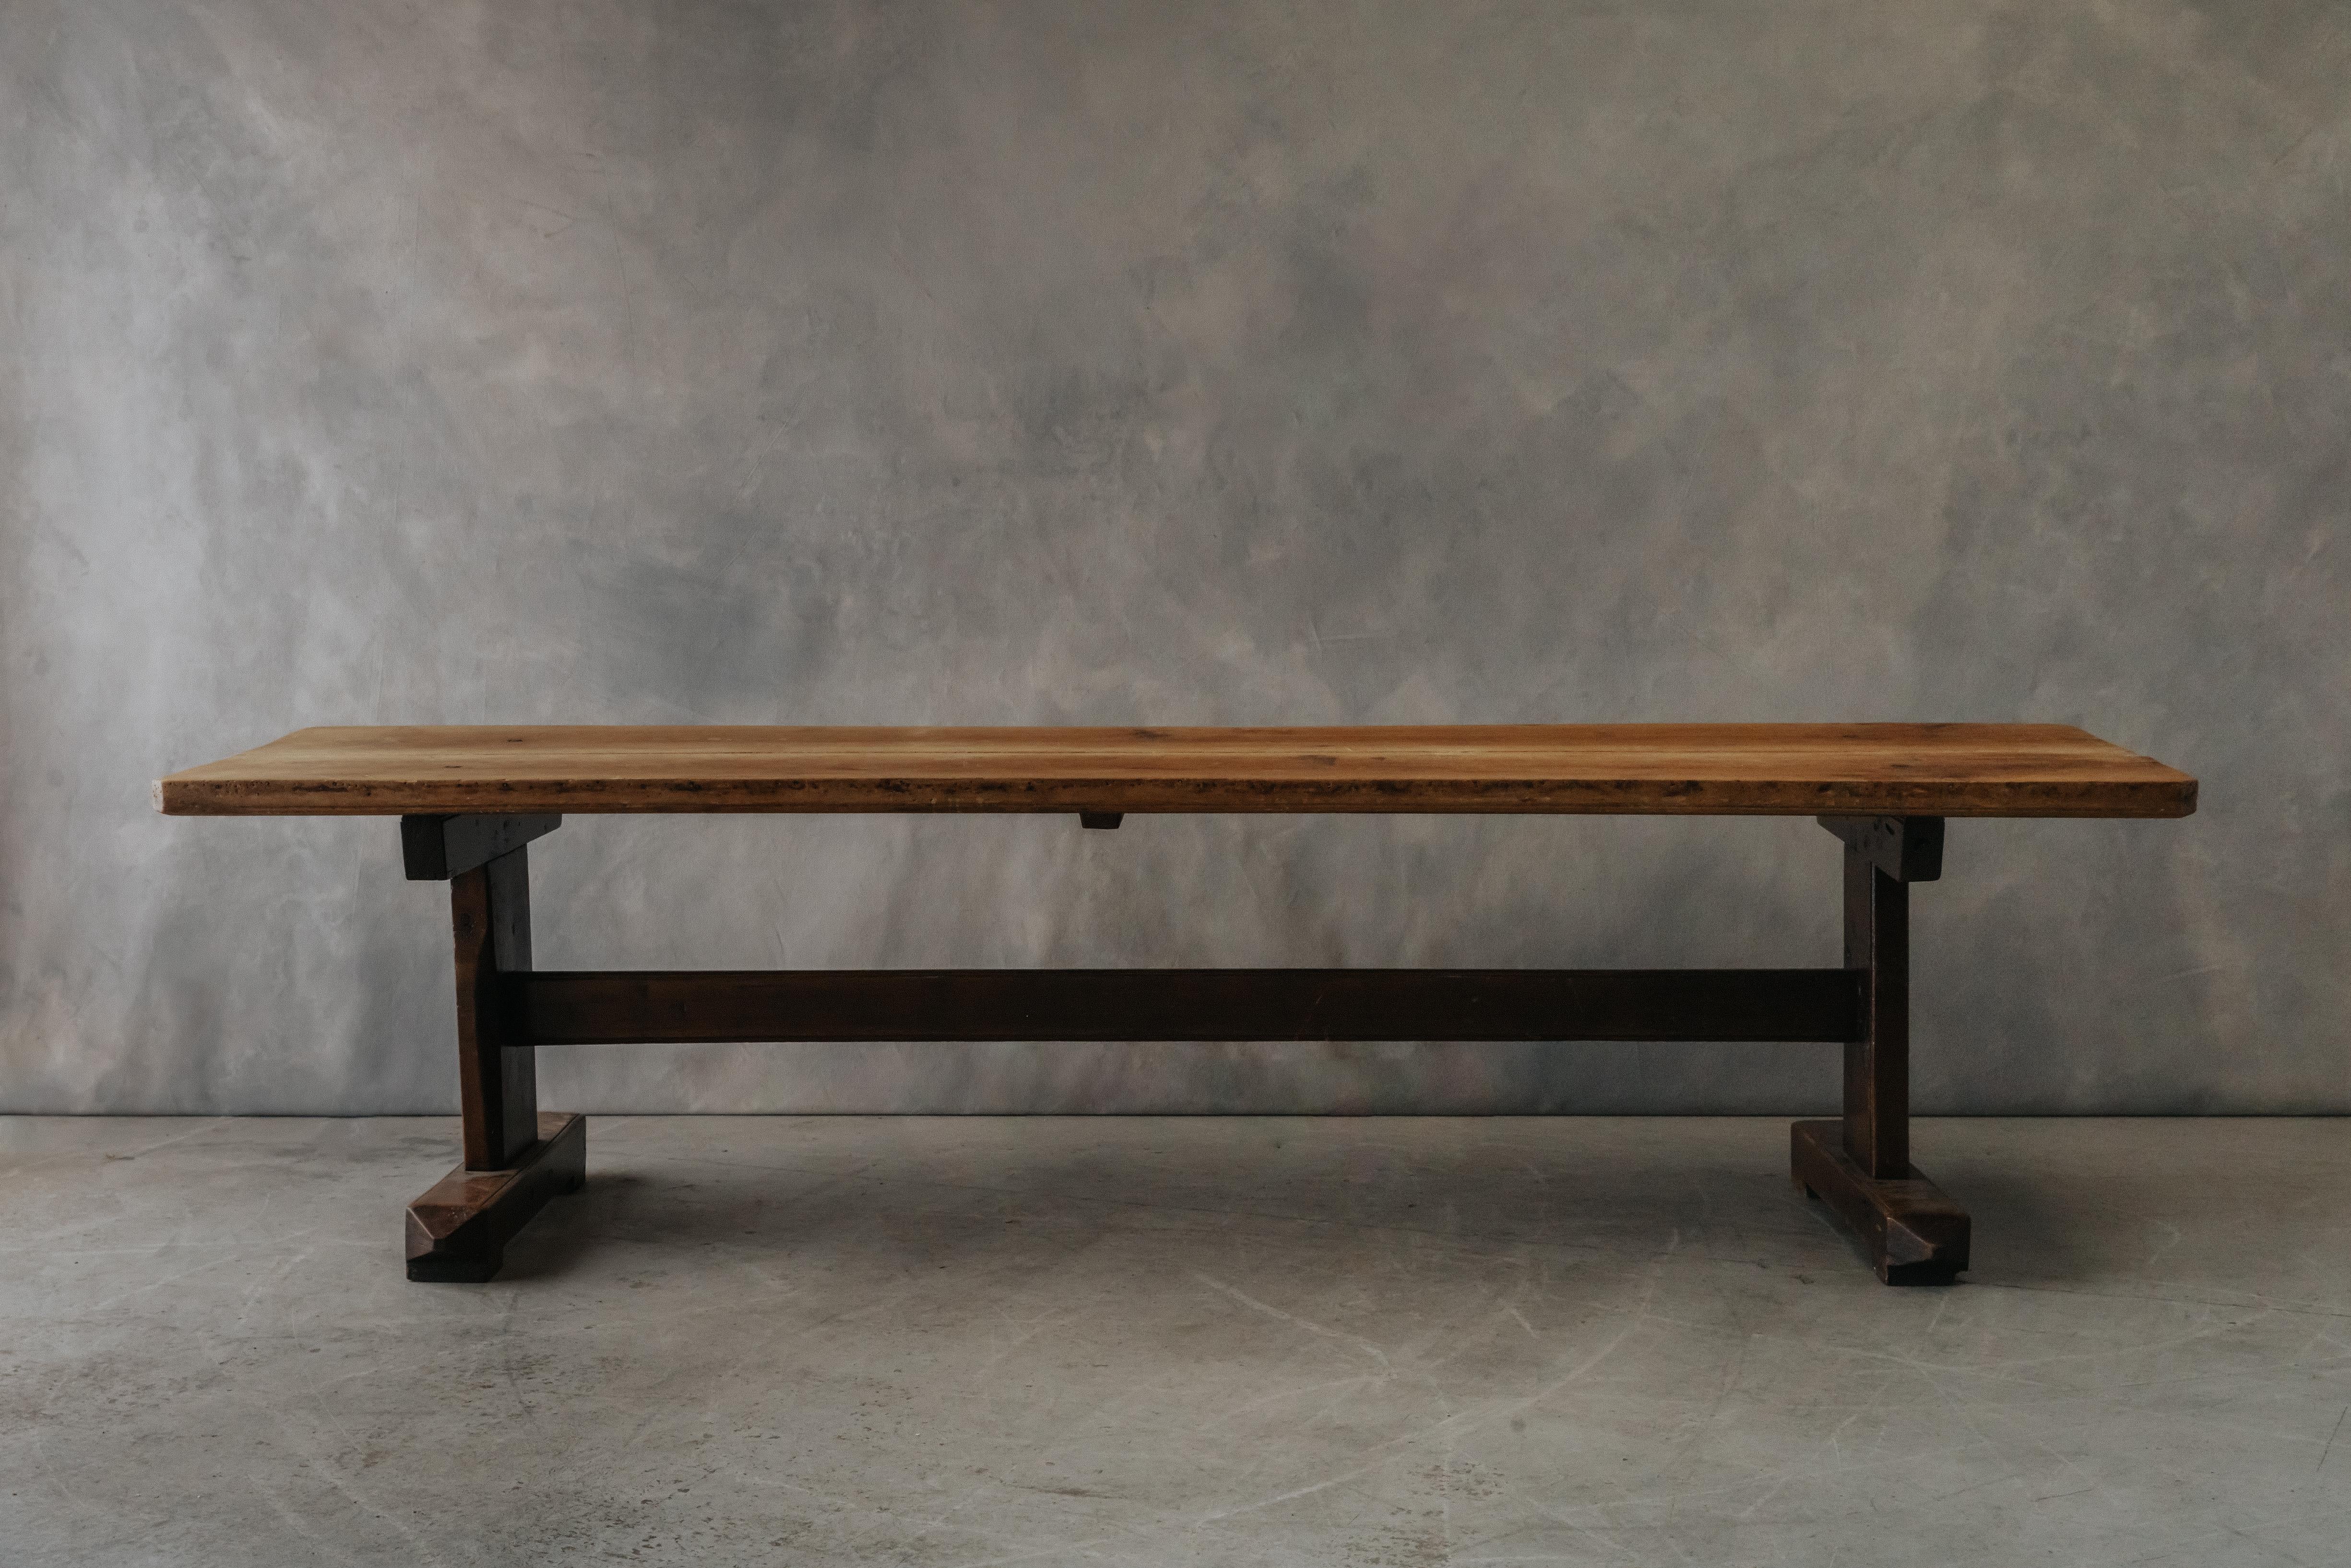 Large Oak Monastery Table From Italy, Circa 1880.  Solid oak construction with great patina and use.  Fantastic base.